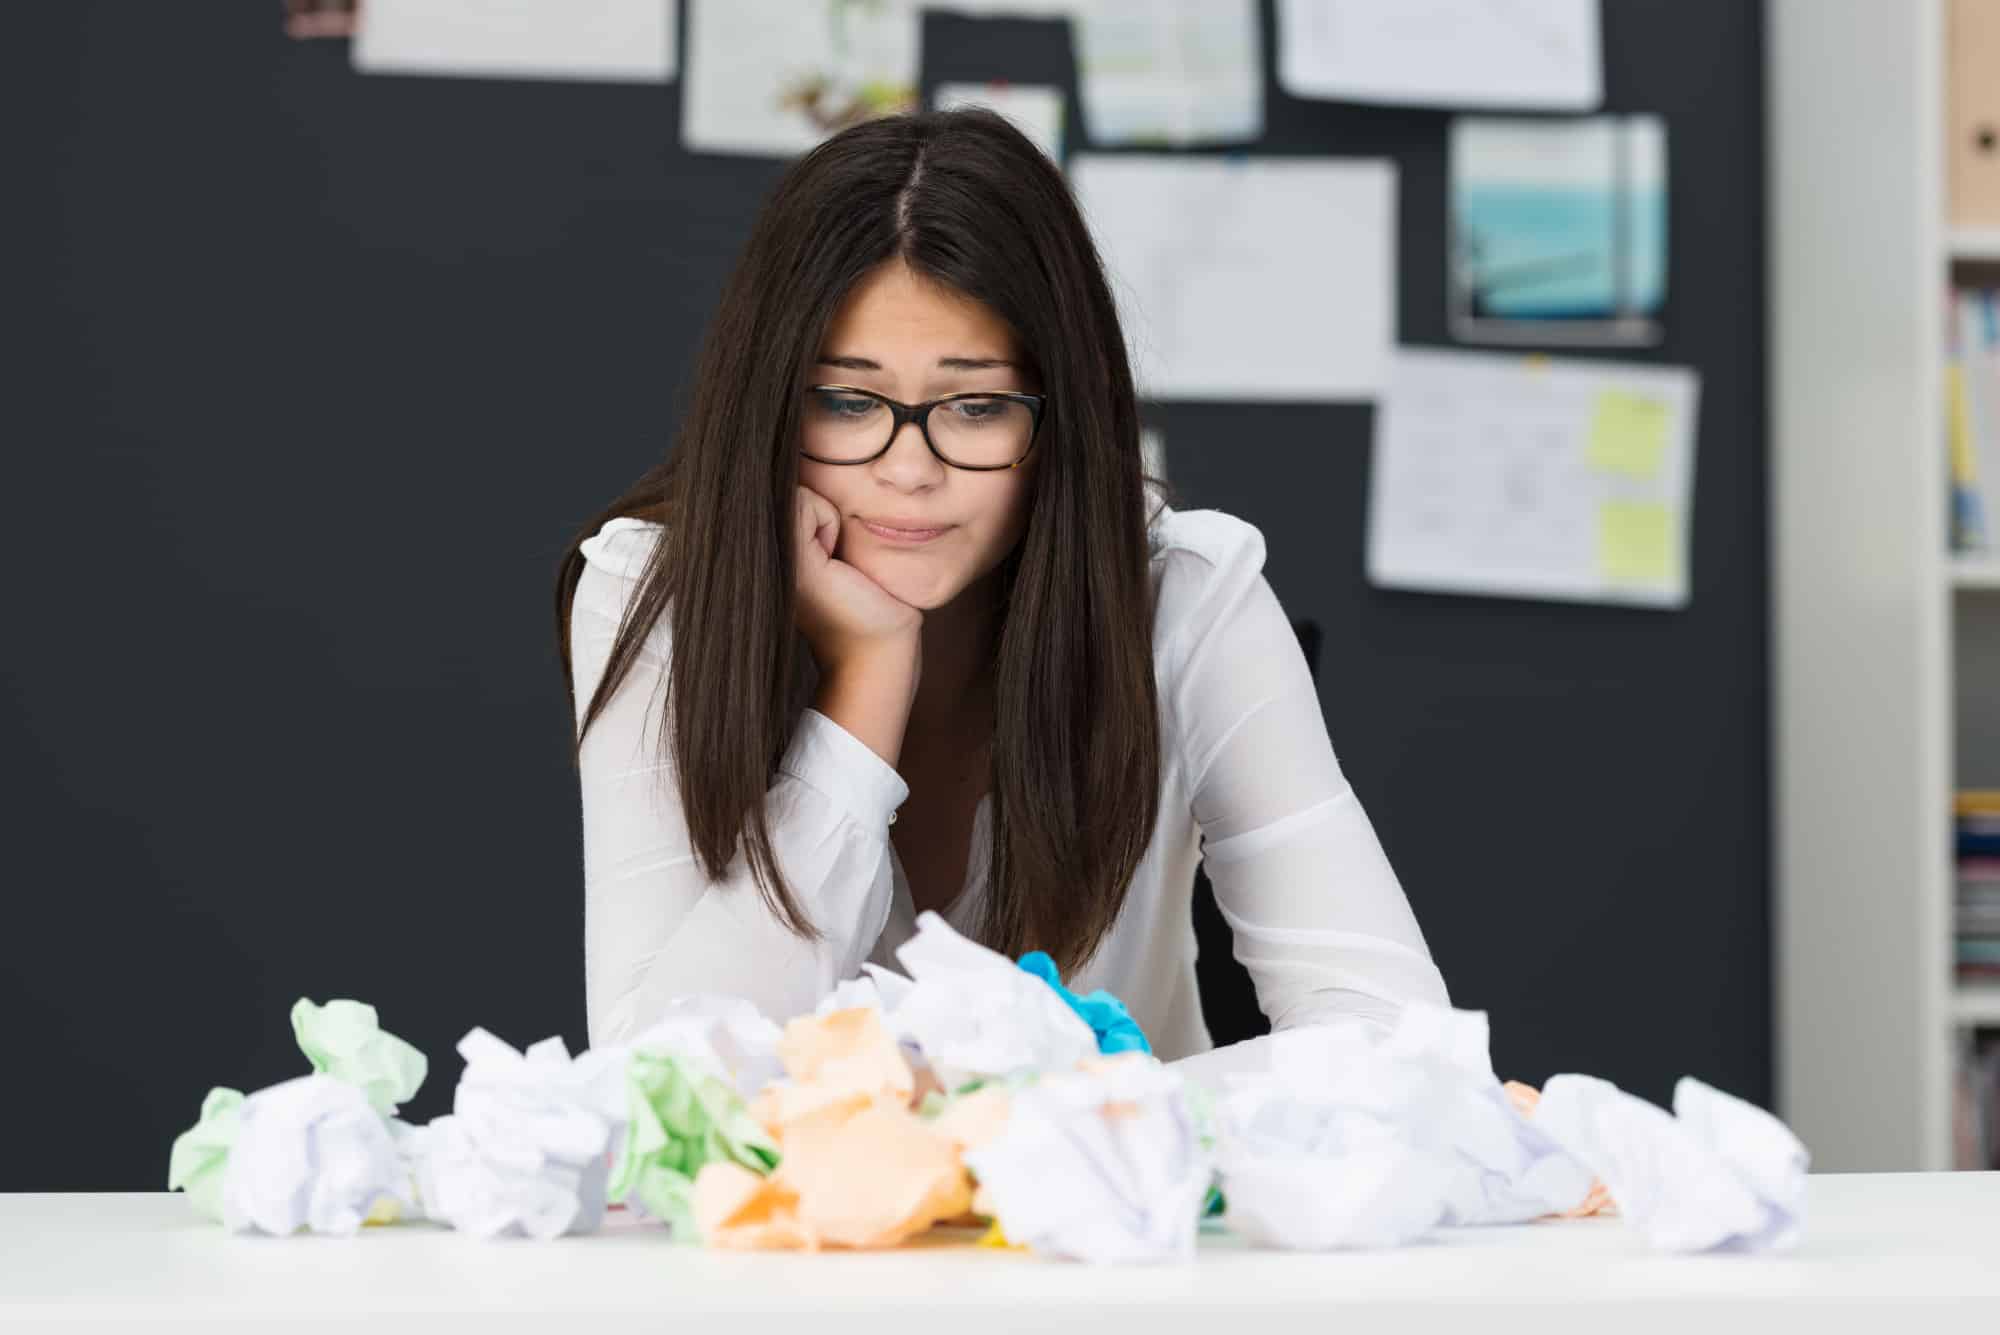 Woman wearing a white sweater and glasses working at a desk with crumbled pieces of colored paper trying to think of a name for her new small business